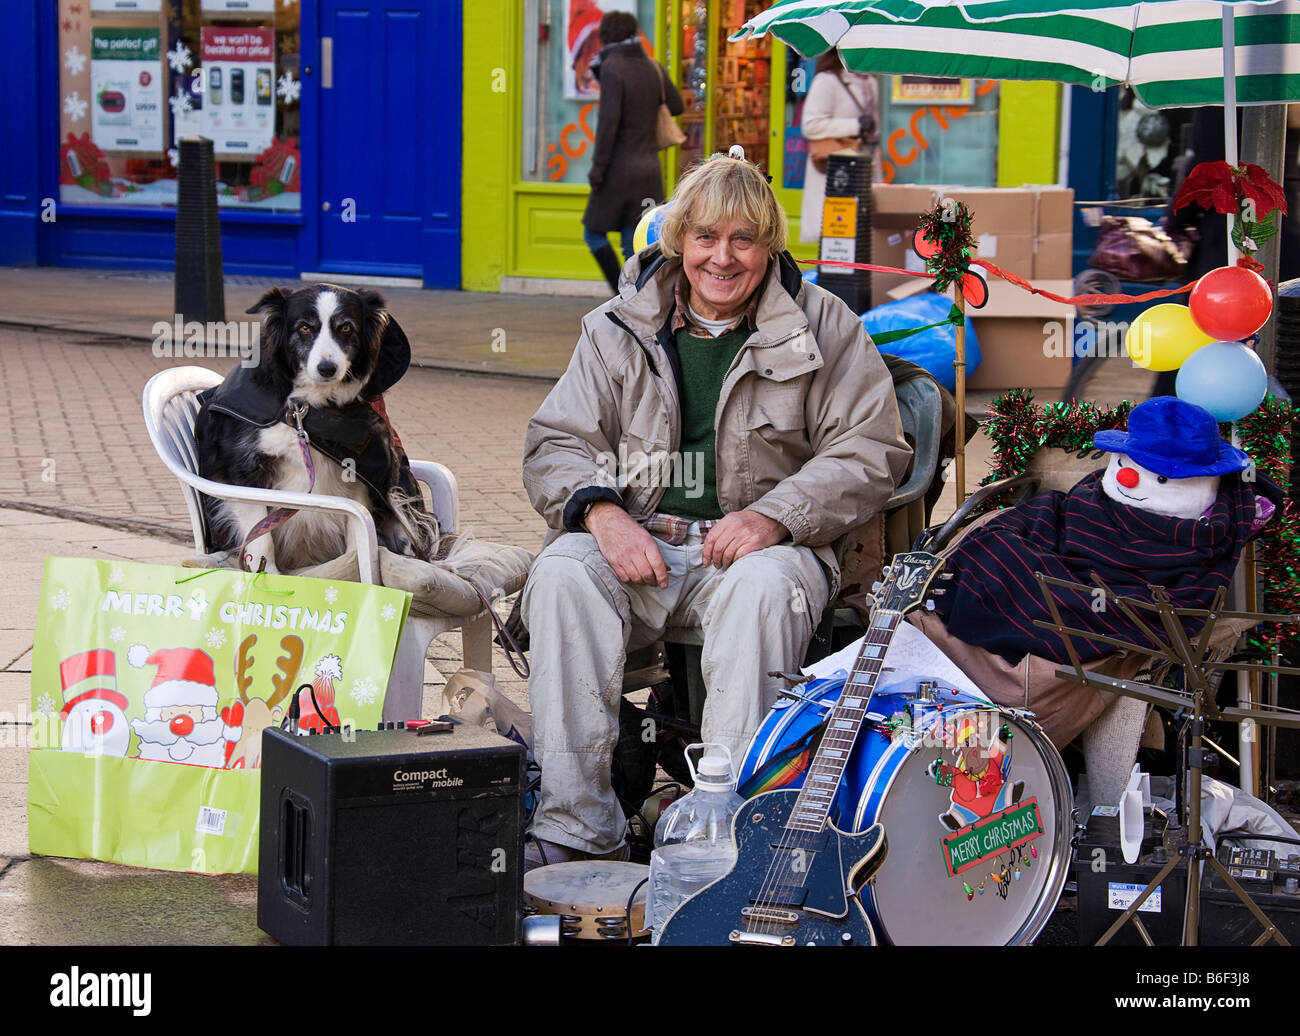 A street busker and dog taking a break from playing Stock Photo